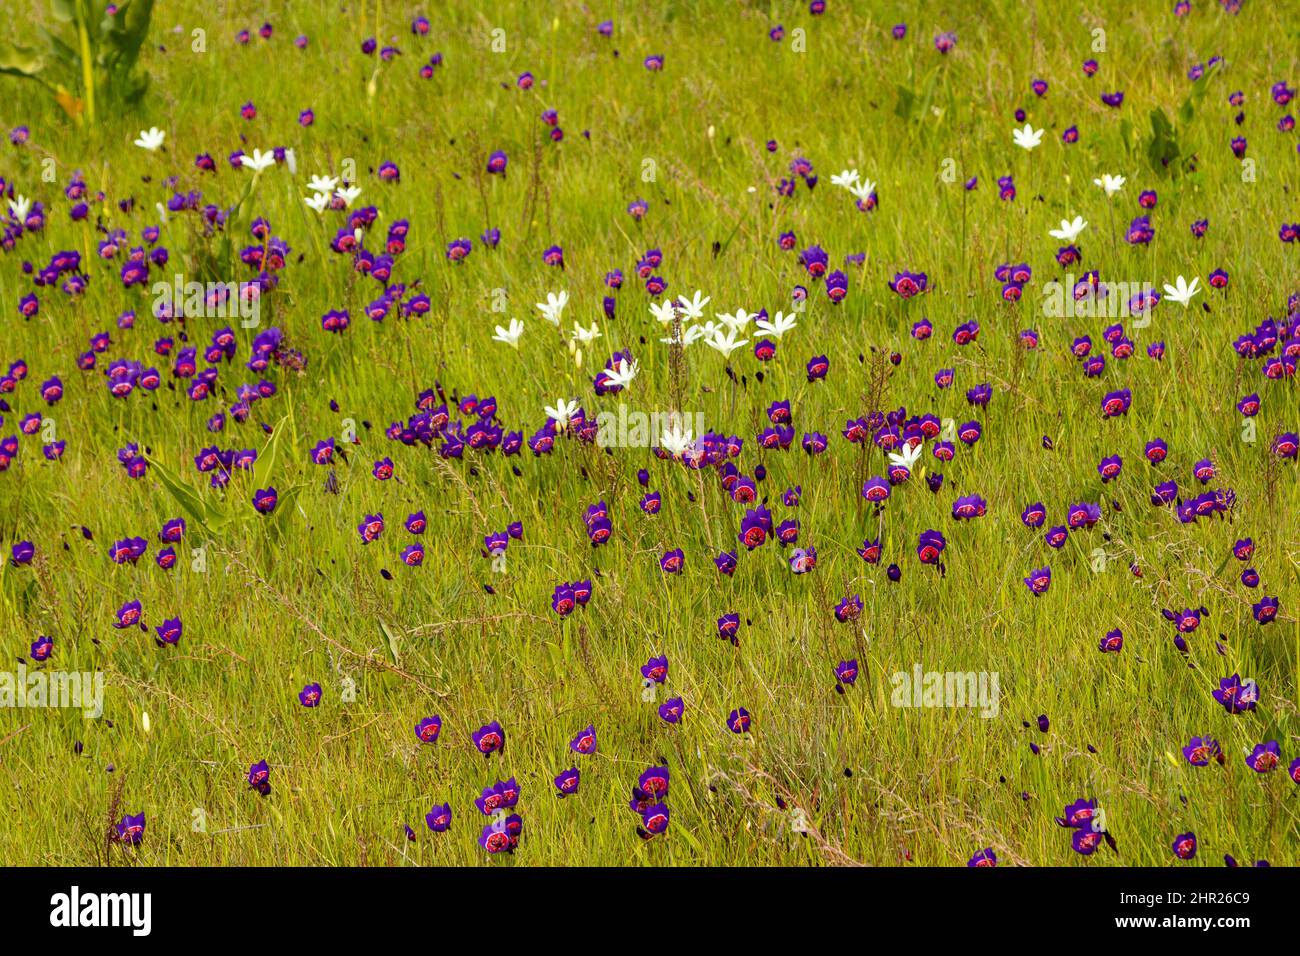 Flowers of Geissorhiza radians and one flower of Romulea eximia in natural habitat near Darling, Western Cape of South Africa Stock Photo